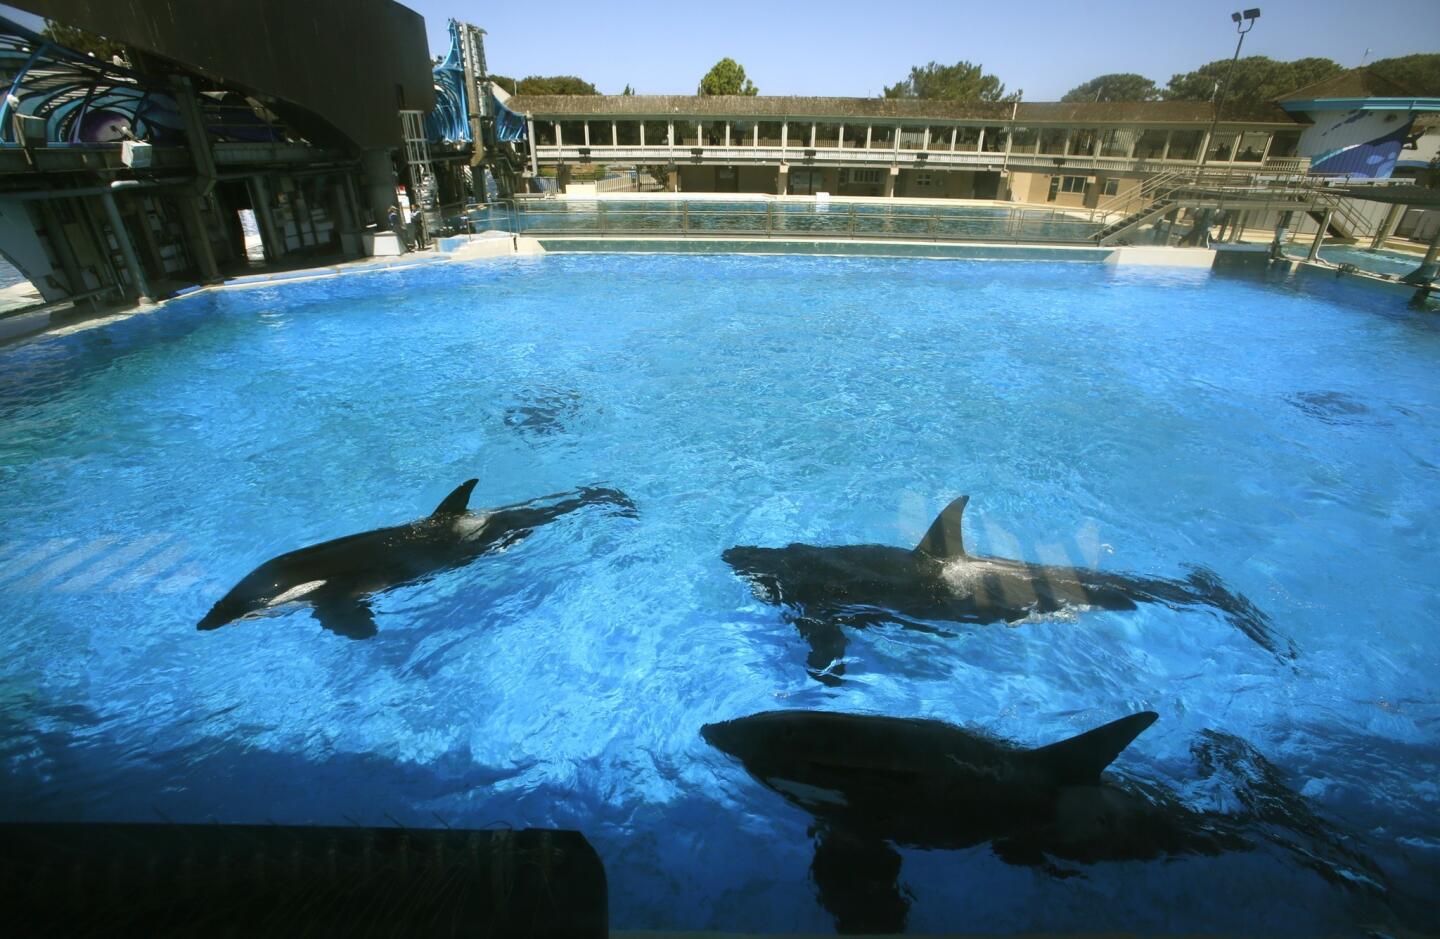 Orca whales swim in a pool backstage before their performance at Shamu Stadium at SeaWorld in San Diego. Battered by controversy over its treatment of killer whales, SeaWorld San Diego announced that it plans to double the size of its orca environment.